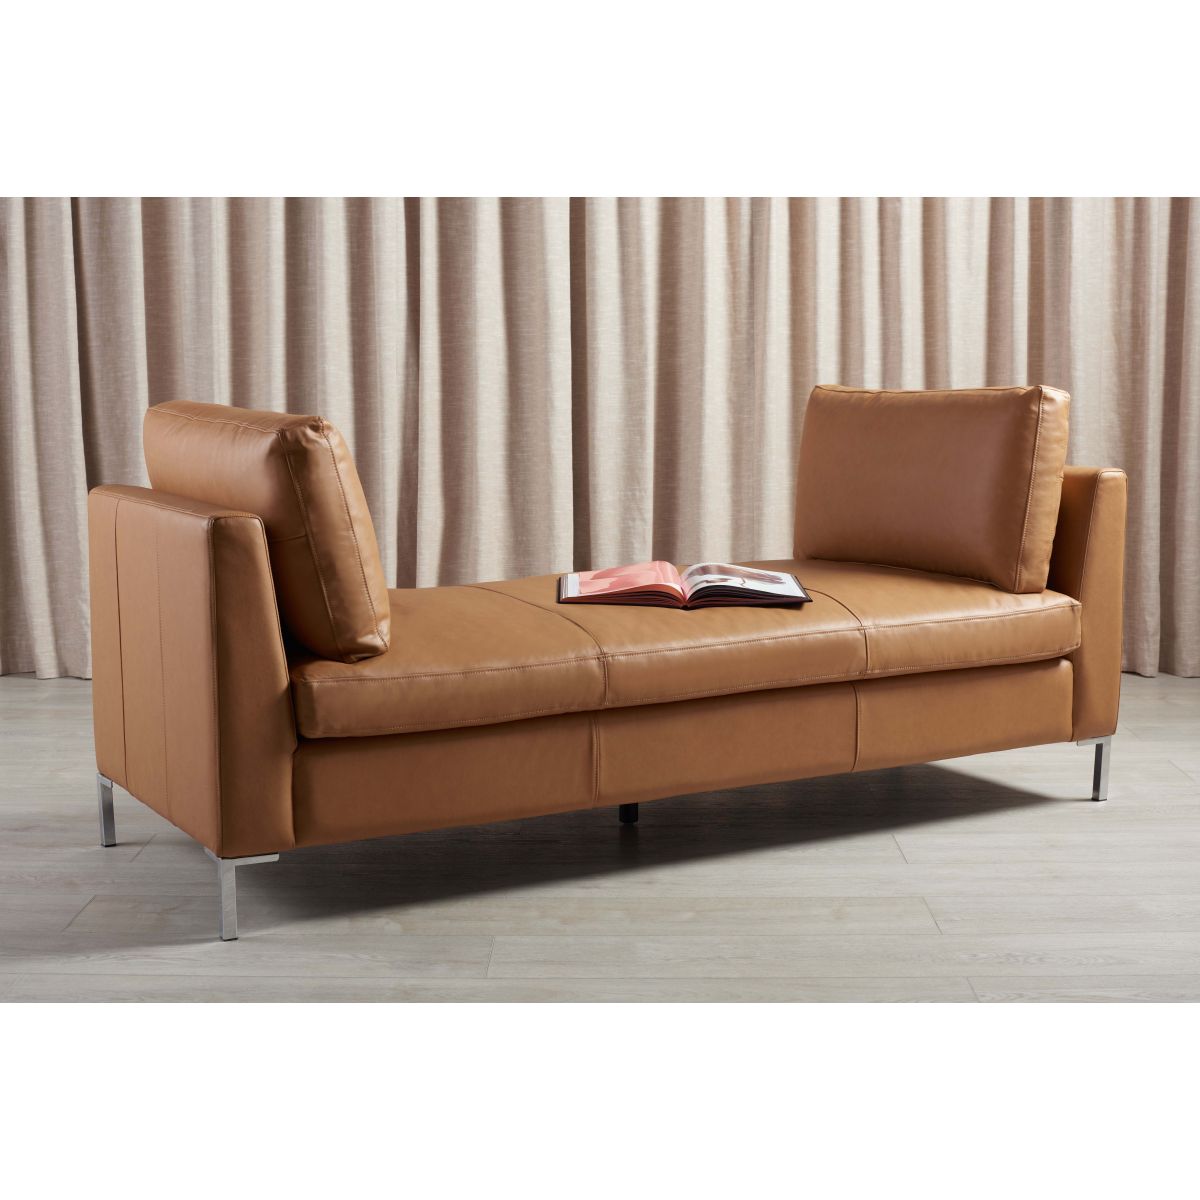 Safavieh Couture Tatianna Leather Bench